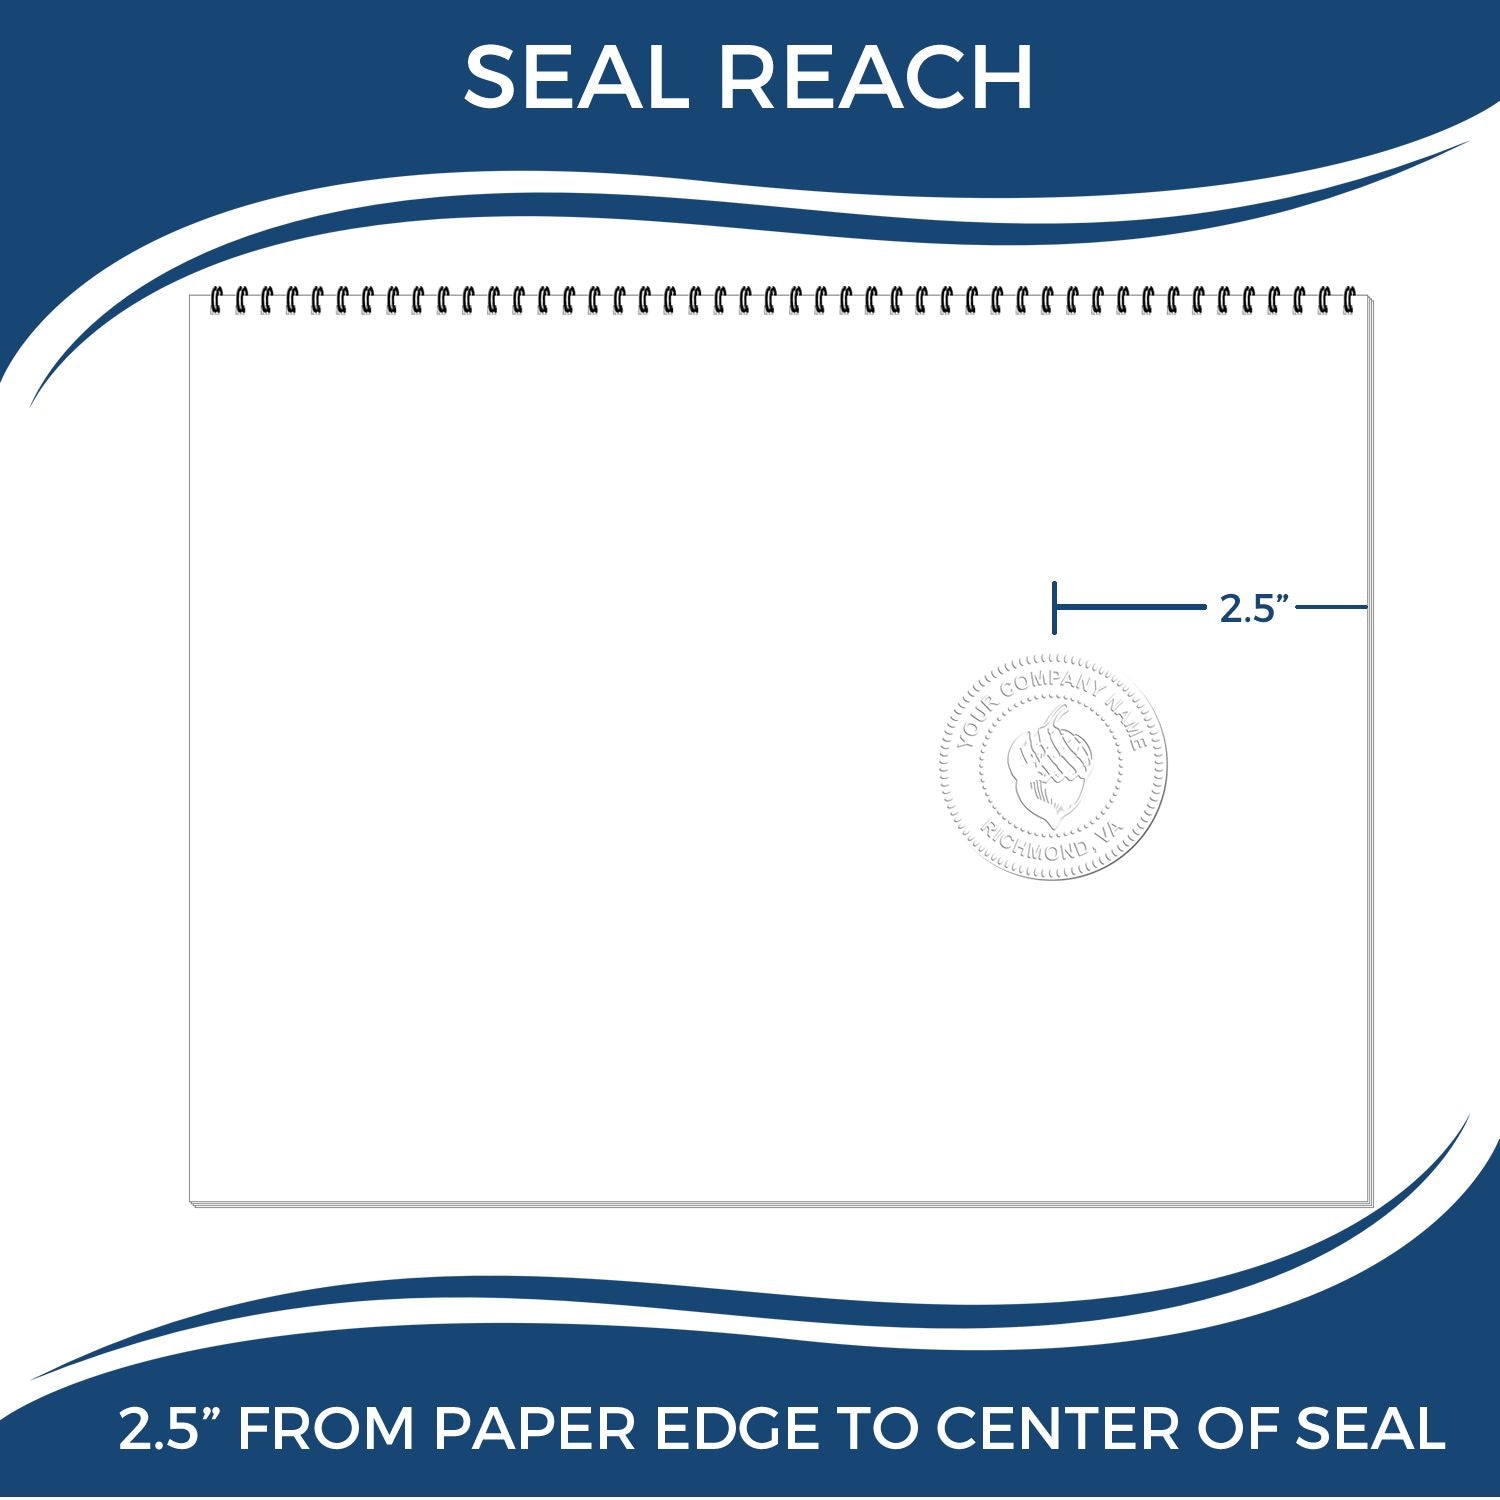 An infographic showing the seal reach which is represented by a ruler and a miniature seal image of the Heavy Duty Cast Iron Michigan Geologist Seal Embosser